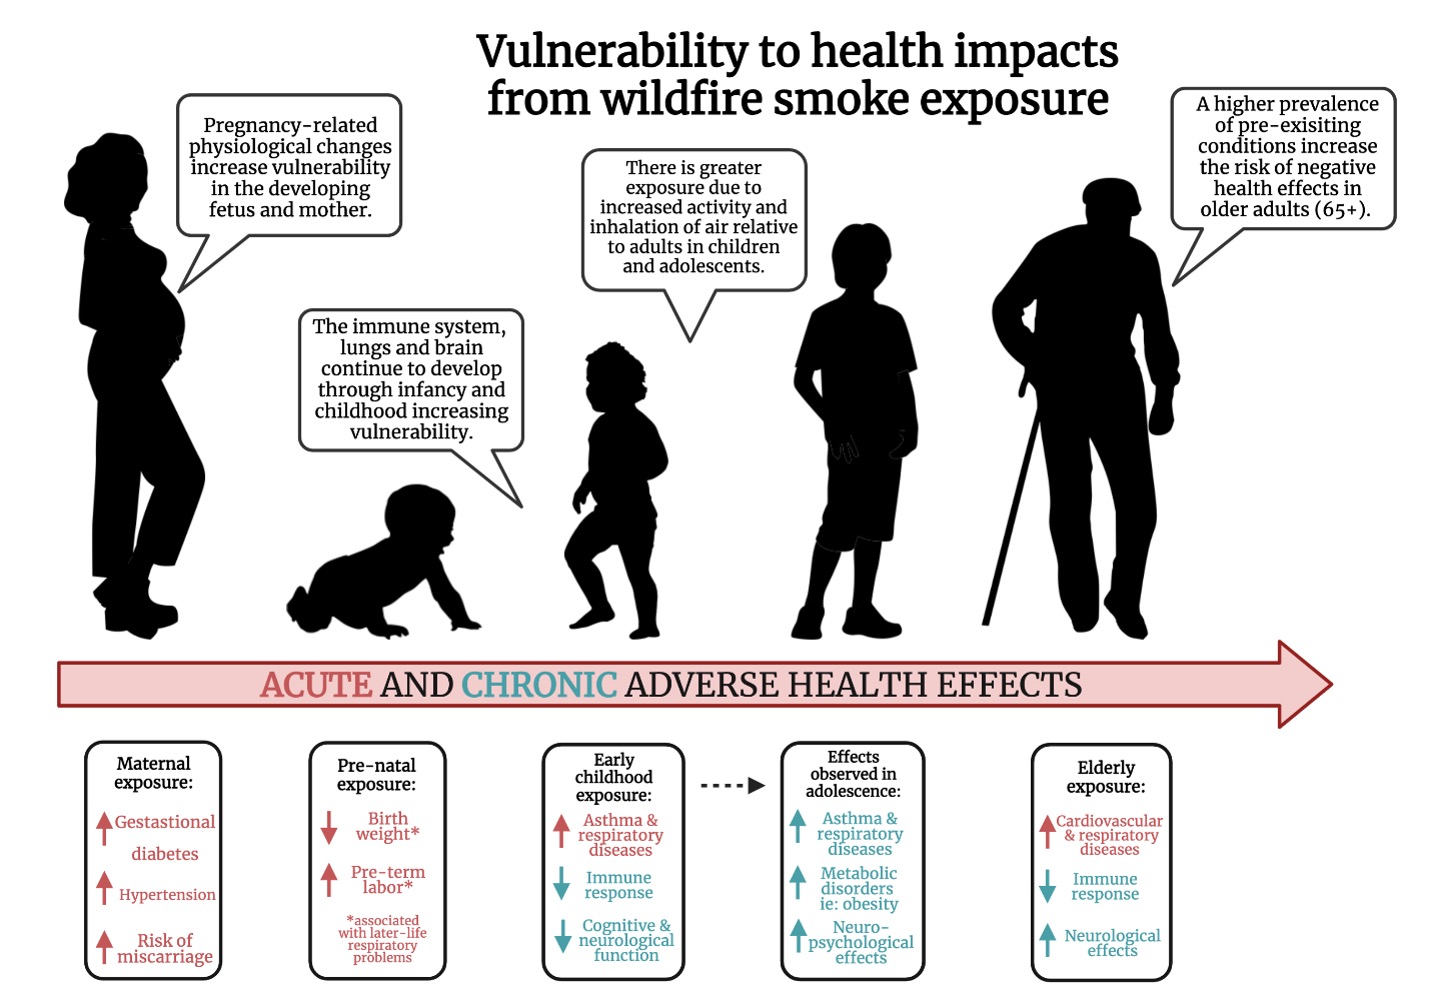 Age influences health impacts of wildfire smoke, which can be acute and chronic.